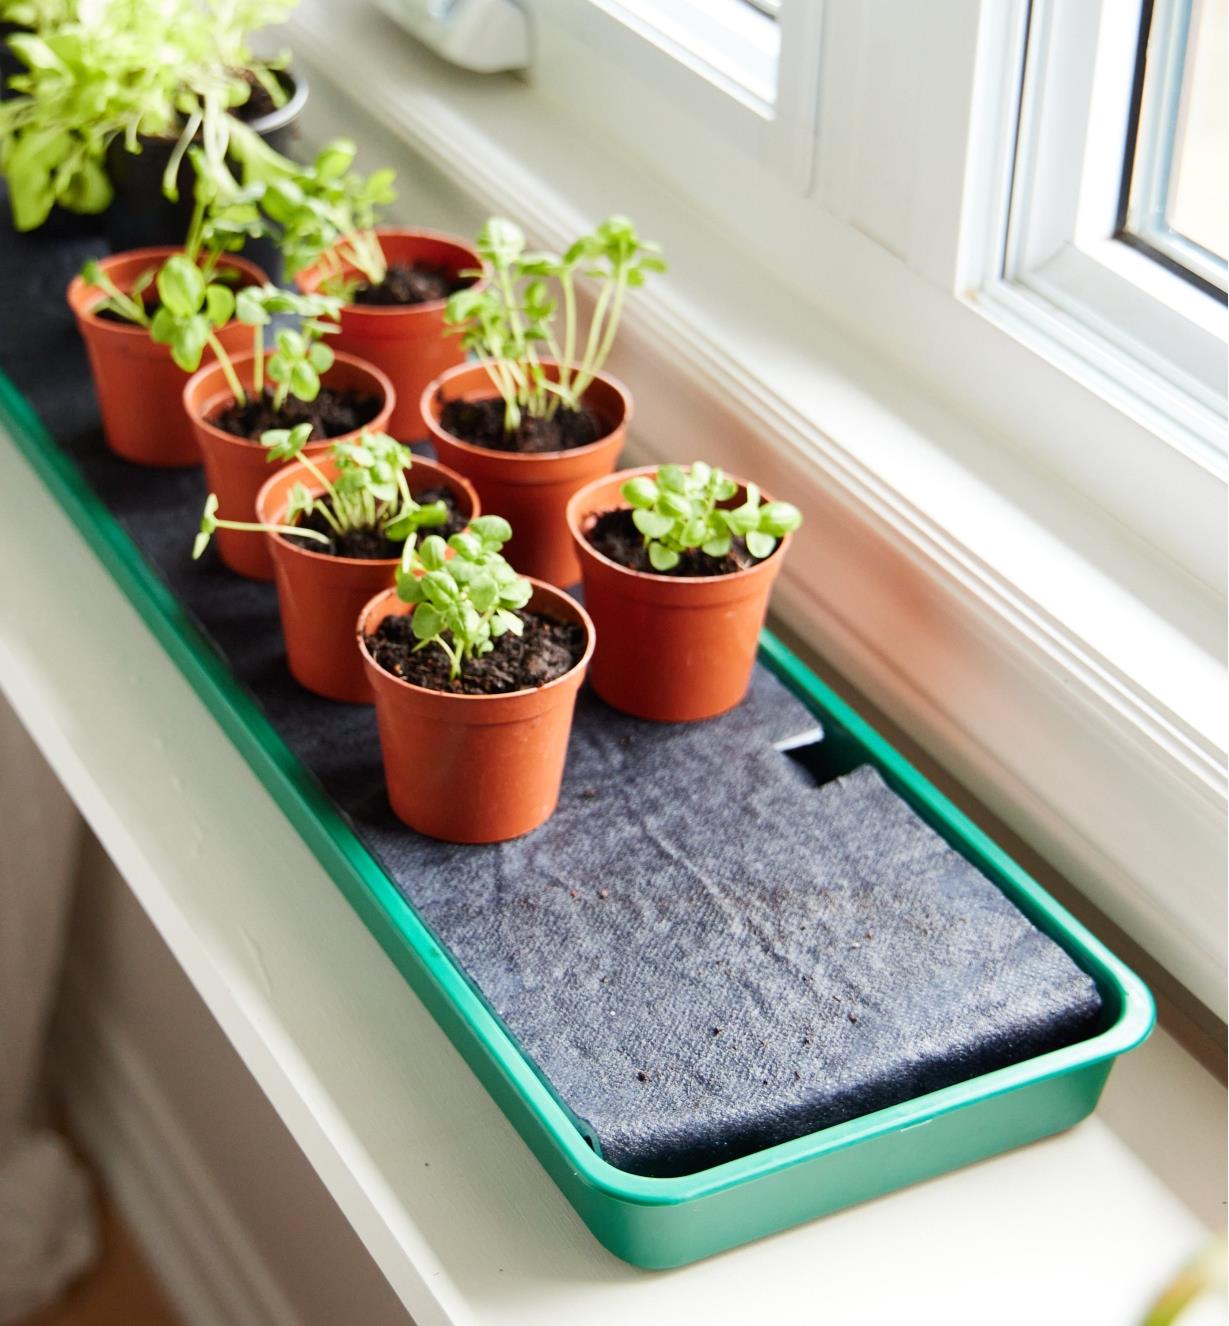 Eight potted plants on a self-watering tray in front of a window